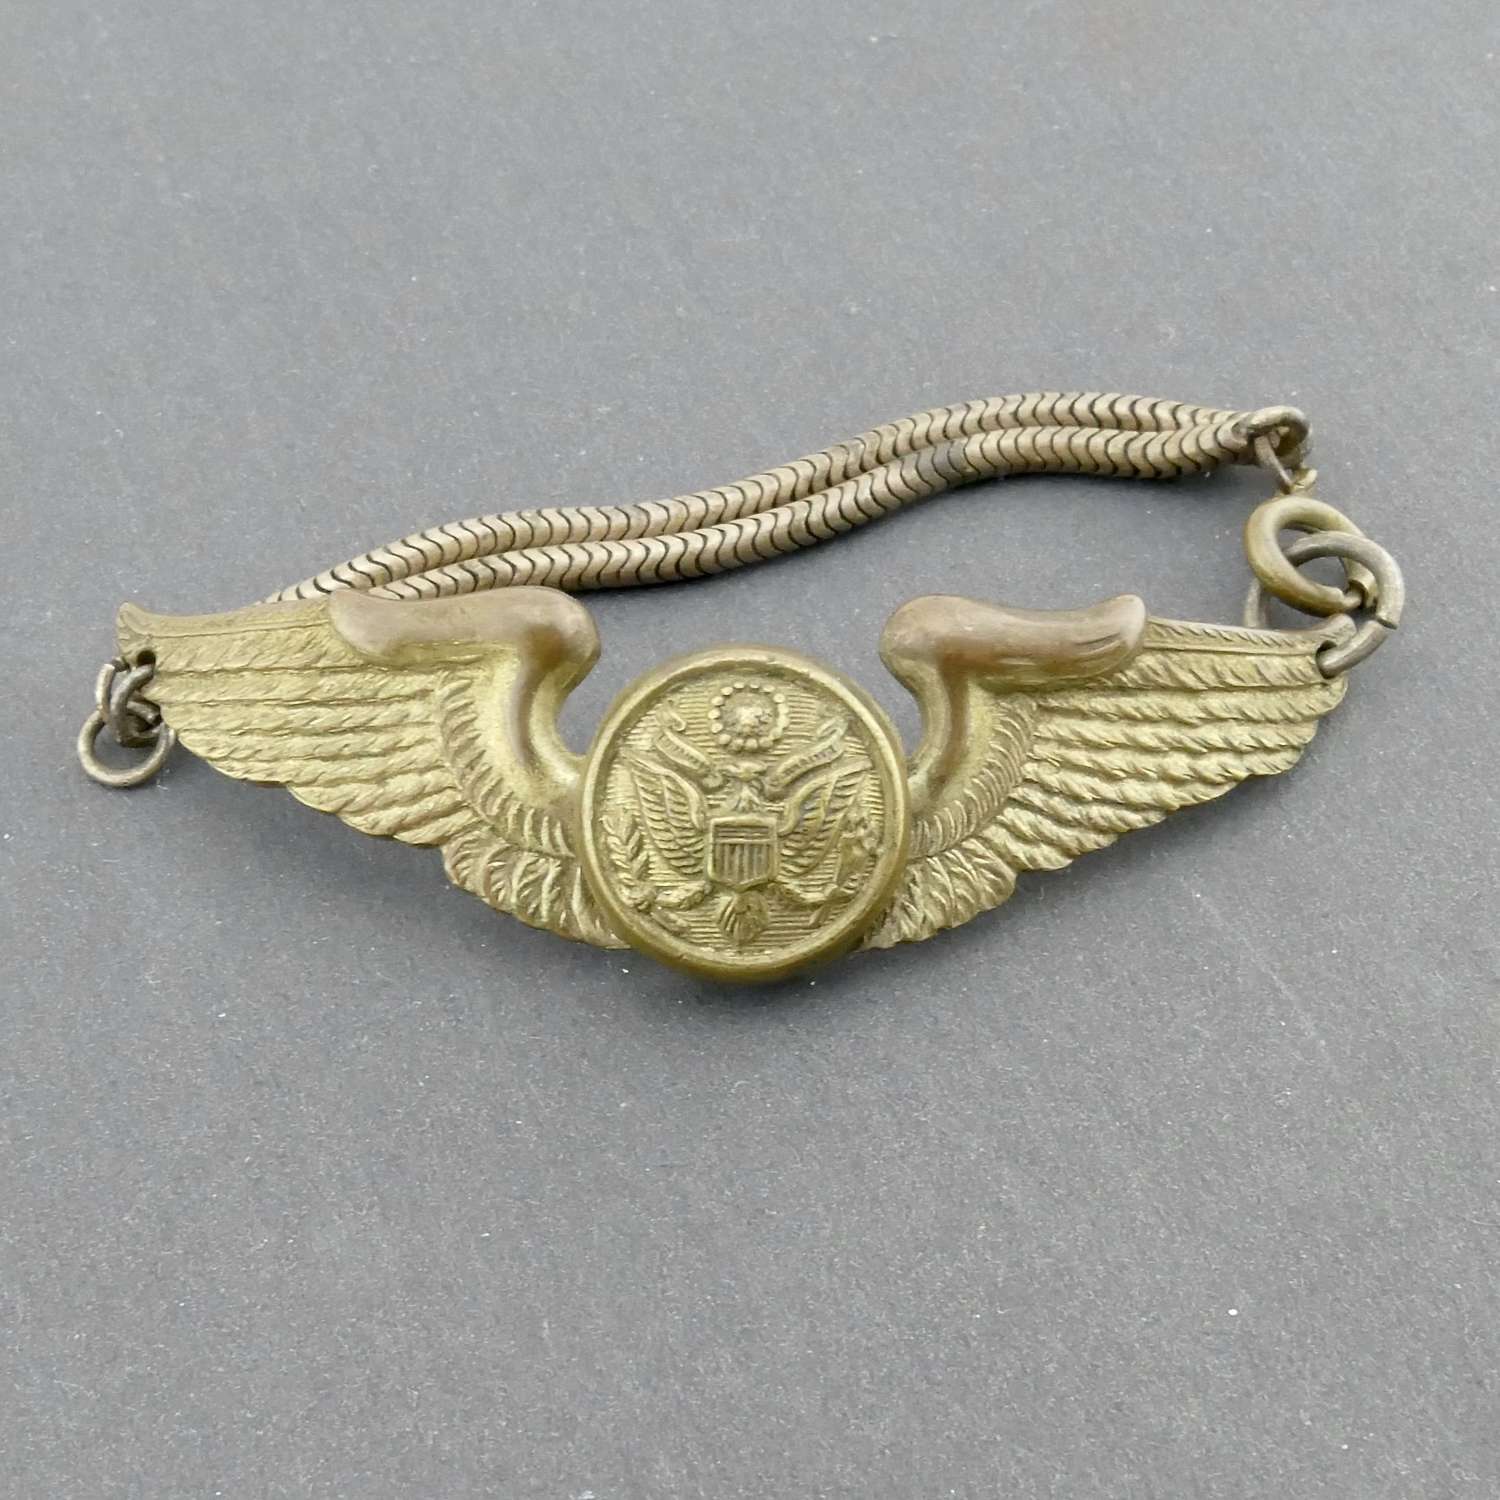 USAAF aircrew wing bracelet